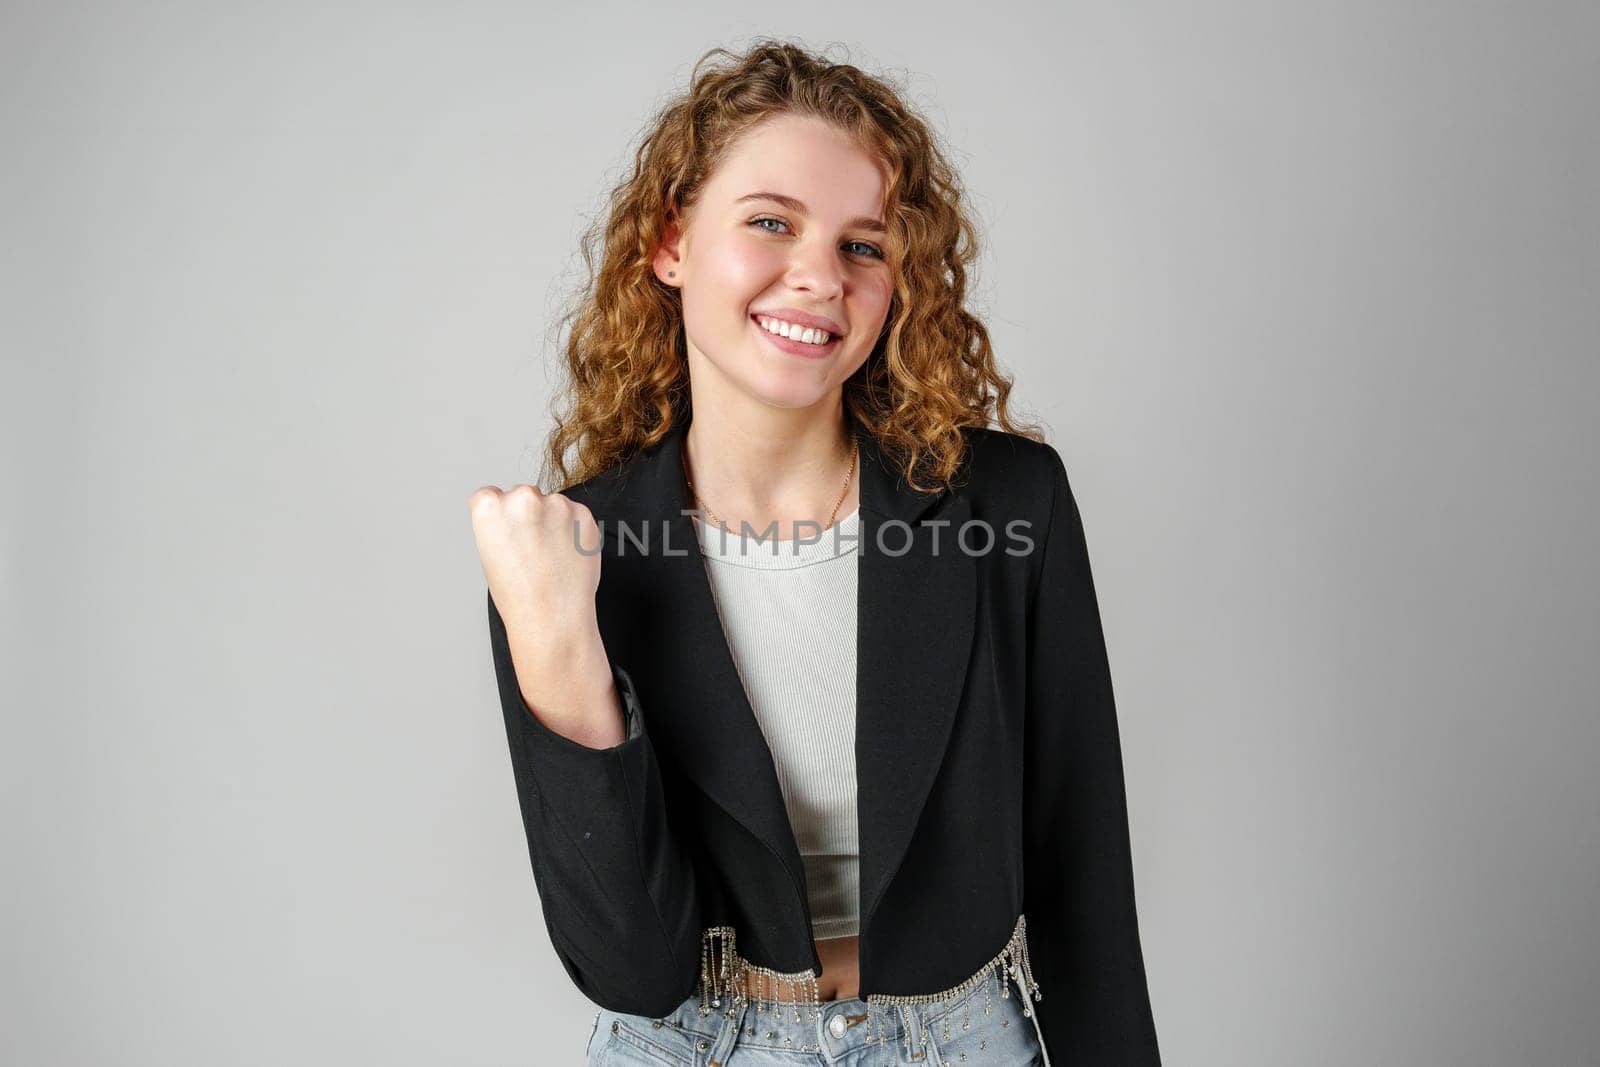 Excited Young Woman Celebrates Success With Raised Fists Against a Gray Background by Fabrikasimf